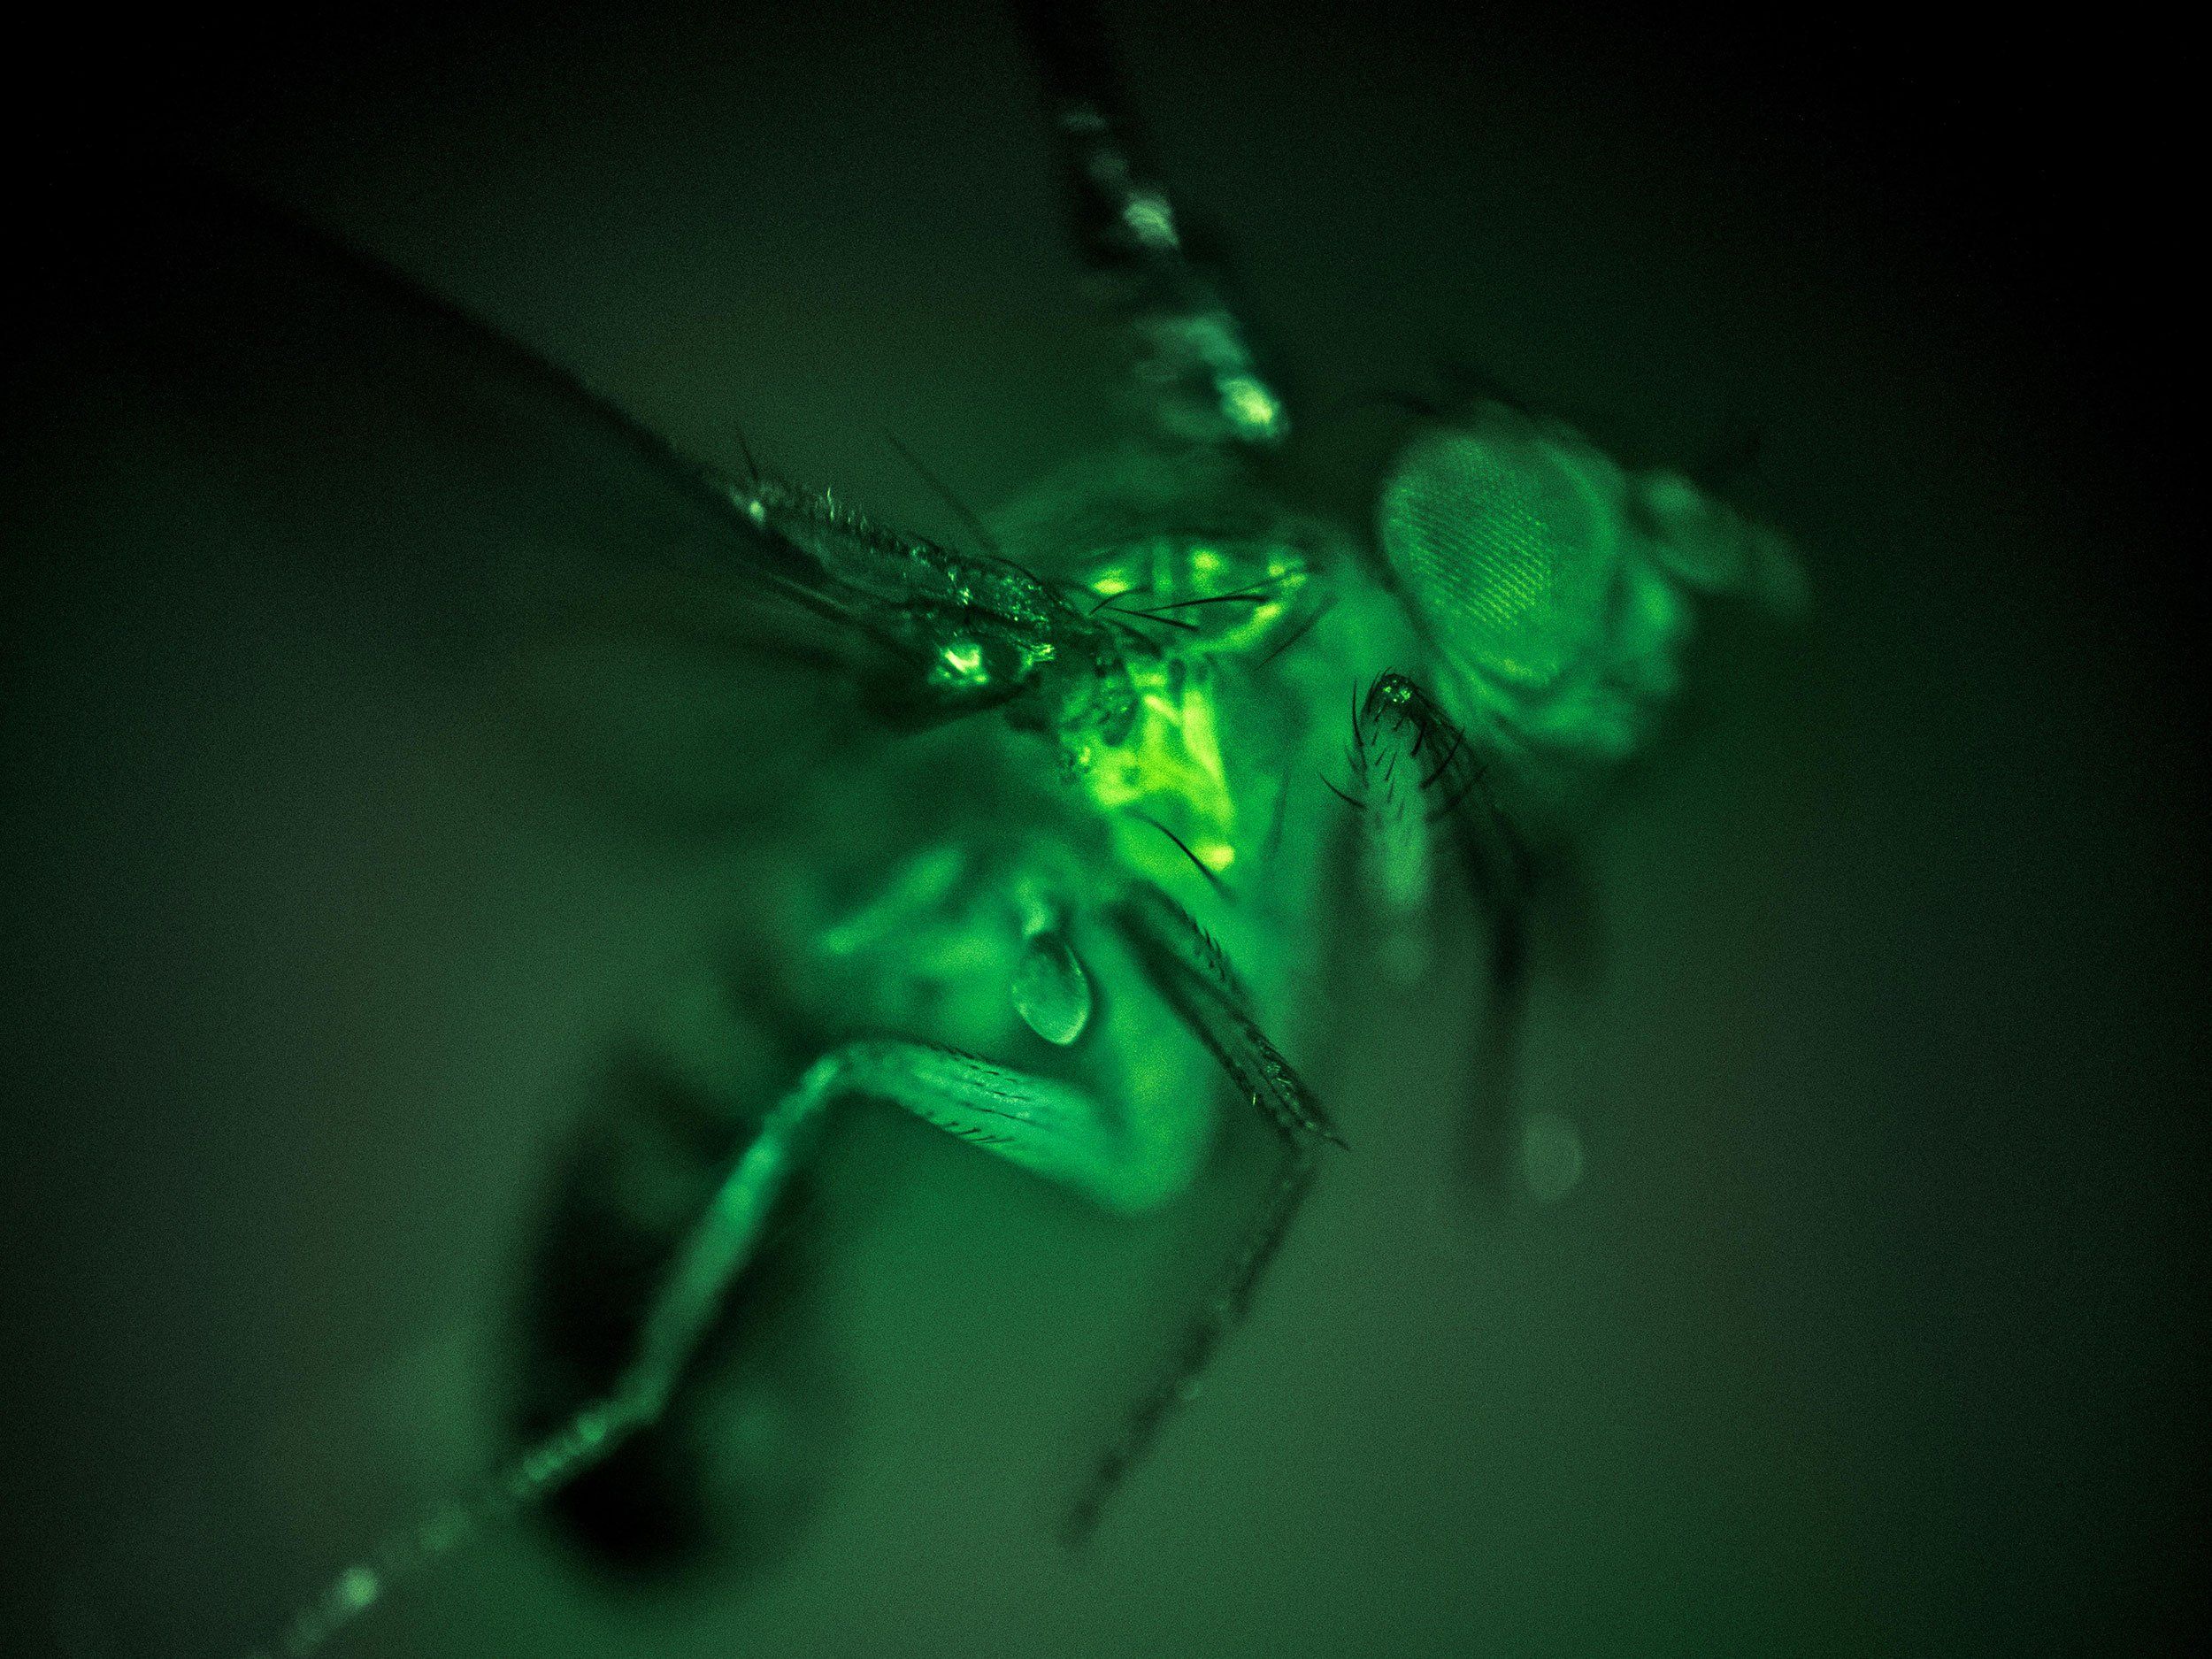 a green colored close-up image of a fruit fly in flight